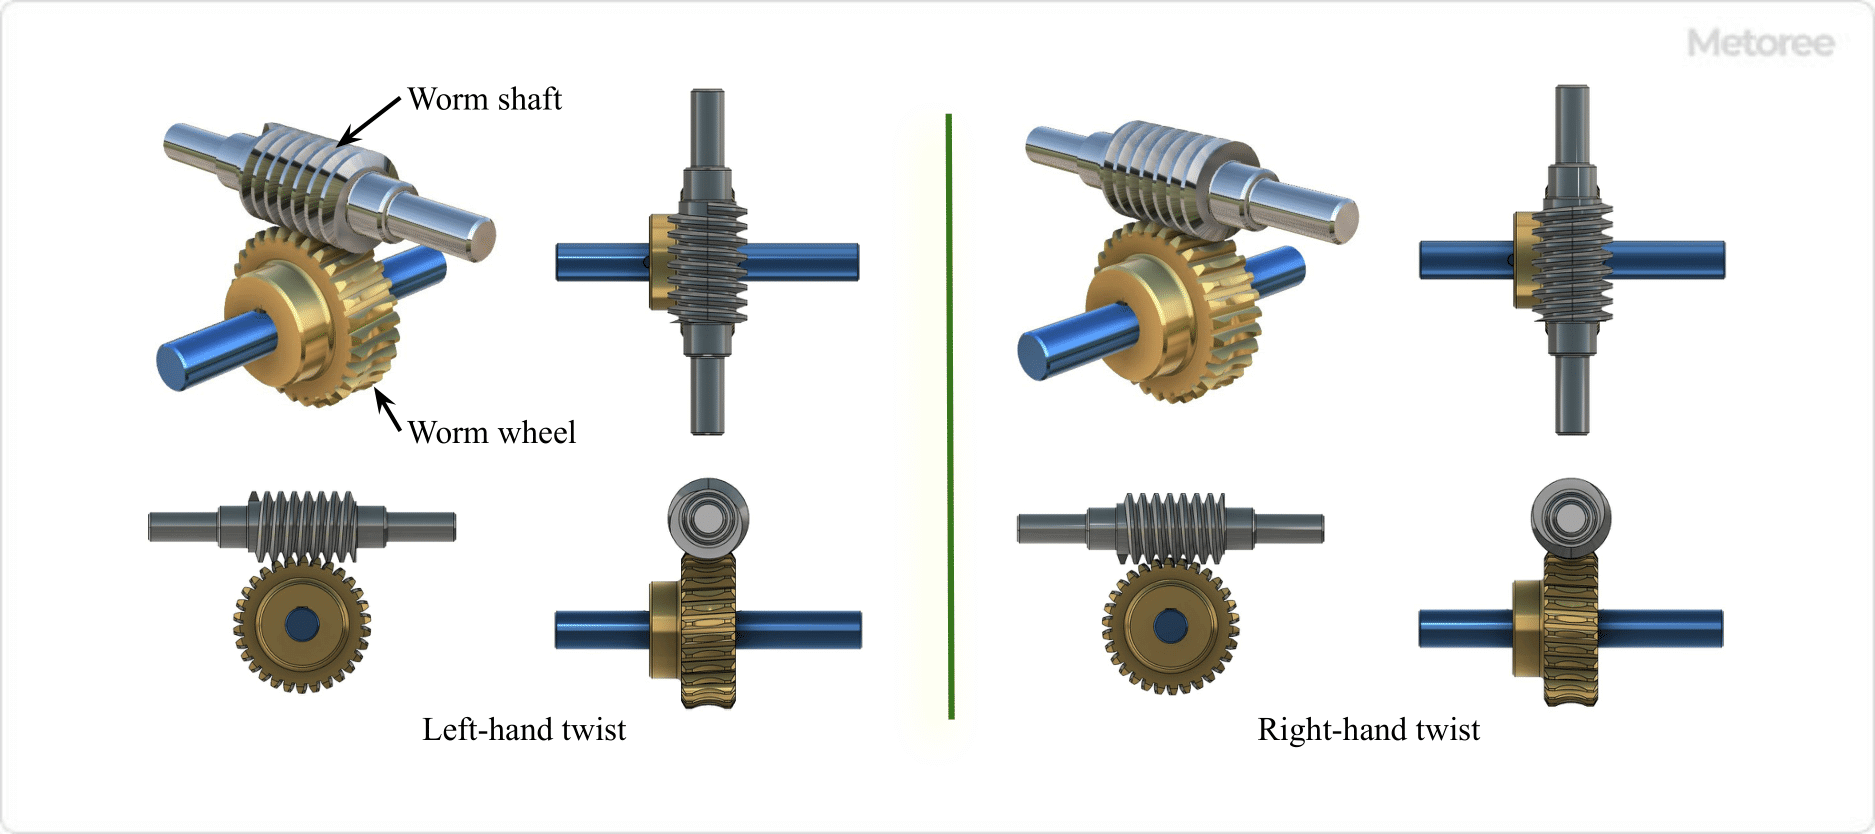 Professional Manufacturer of Worm Reduction Gearbox Reverse Worm Gear Box -  China Gearbox, Reducer